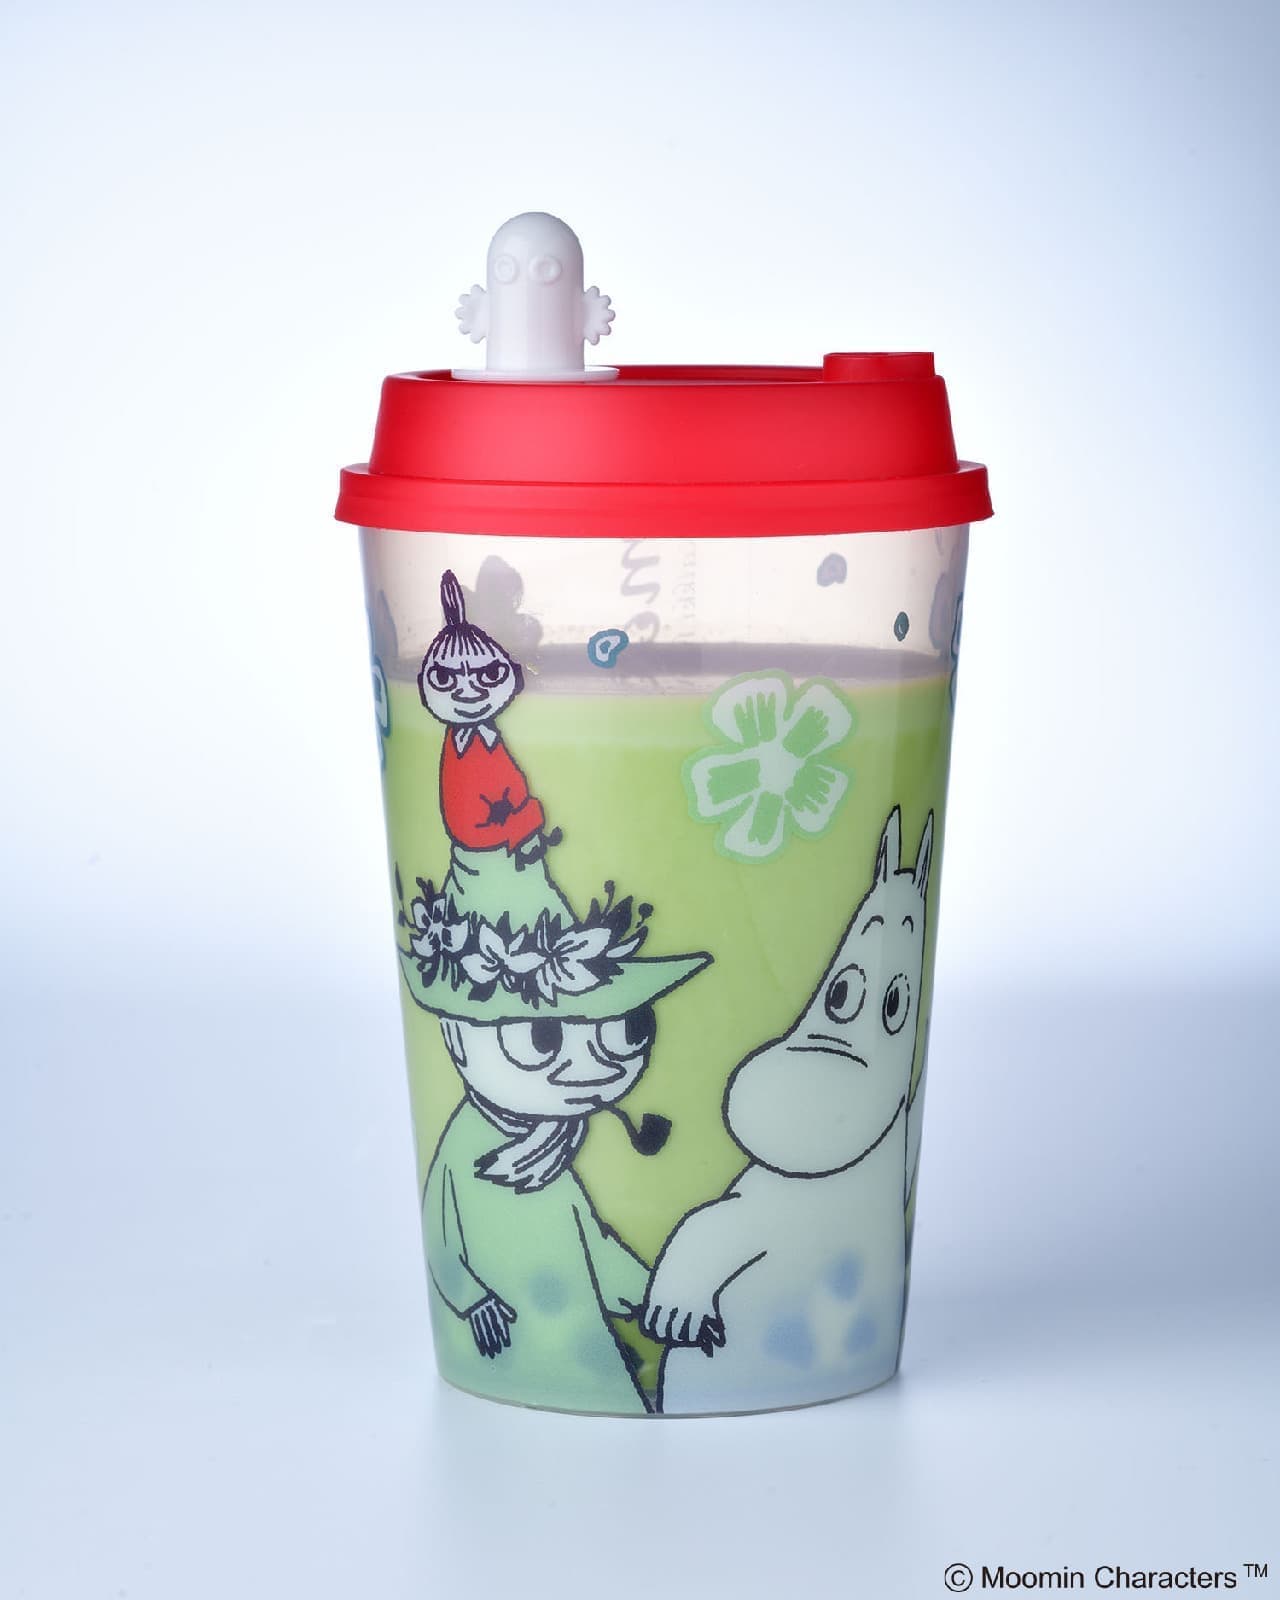 Moomin stand "Souvenir cup"